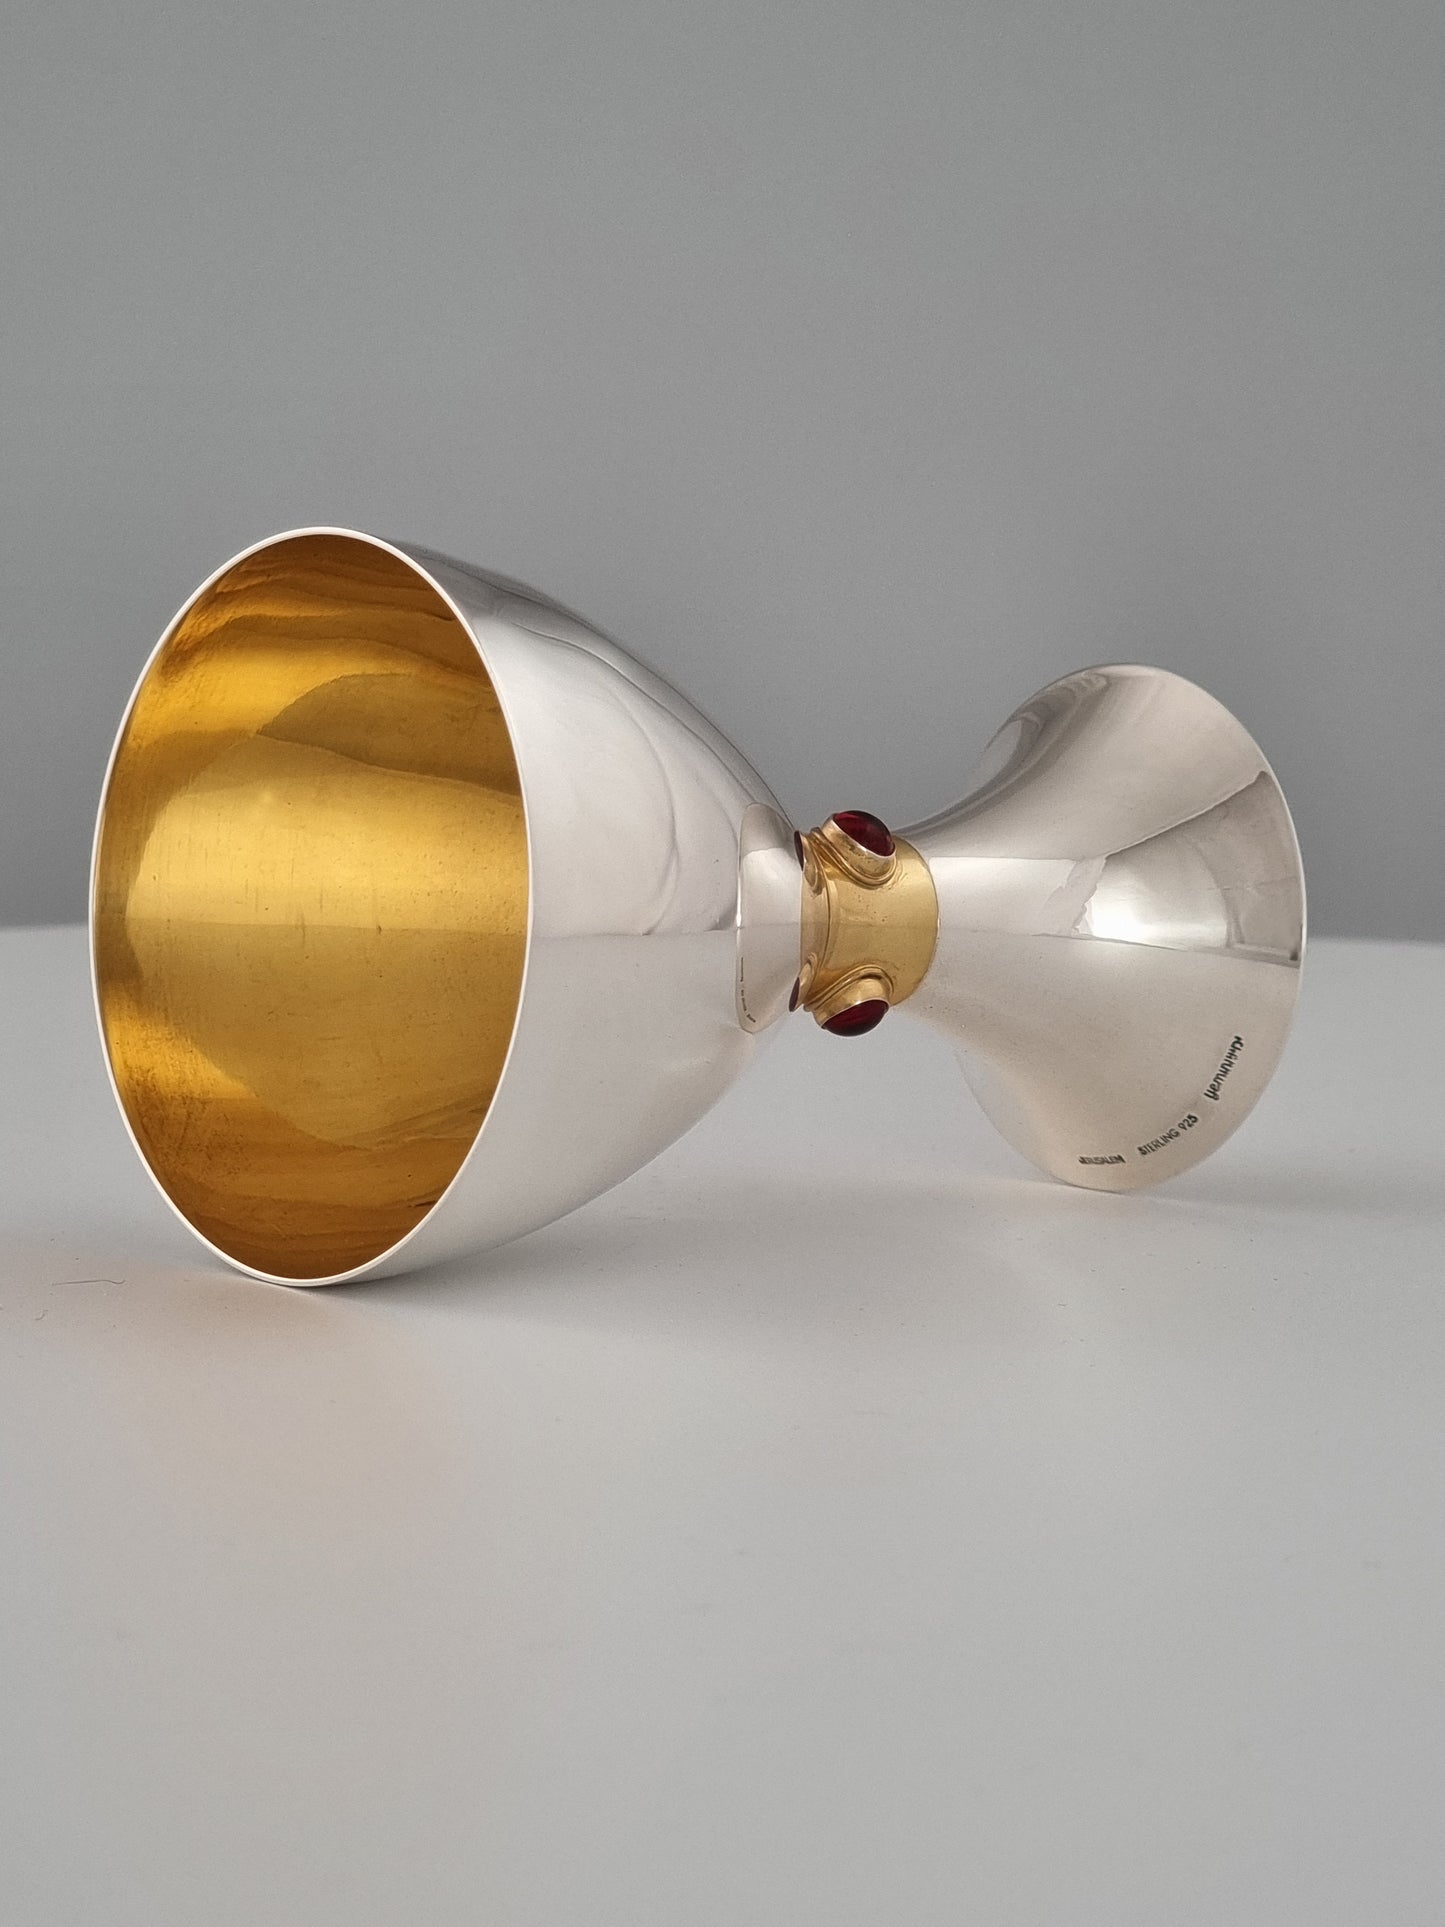 Horizontal Deborah Kiddush cup. Light evenly shines upon the outer silver surfaces.